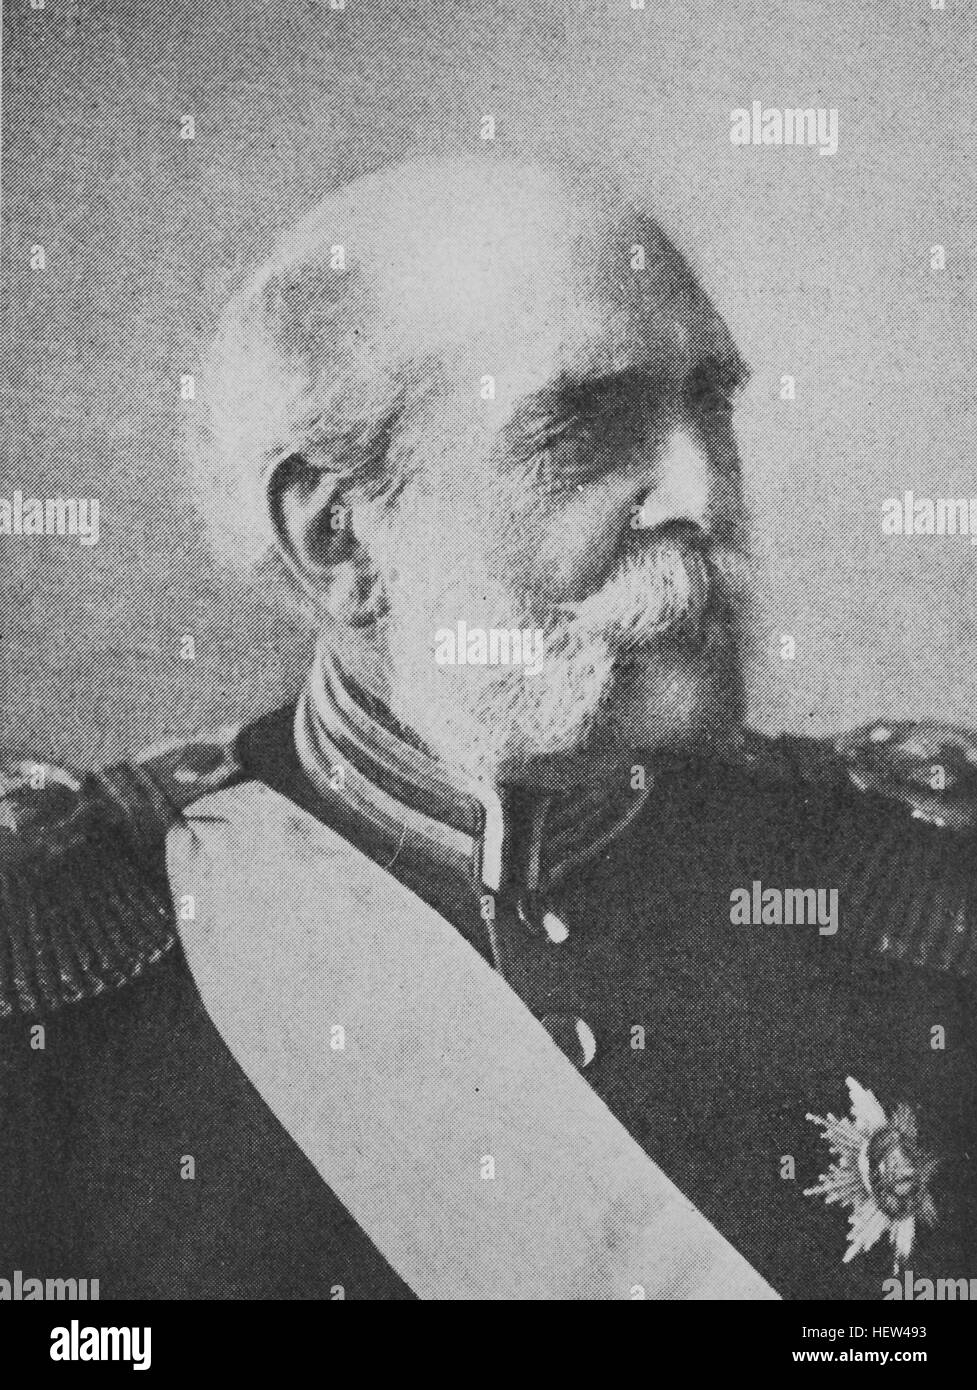 Frederick William, Grand Duke of Mecklenburg, 17 October 1819 - 30 May 1904, German sovereign who ruled over the state of Mecklenburg-Strelitz from 1860 until his death, picture from 1895, digital improved Stock Photo